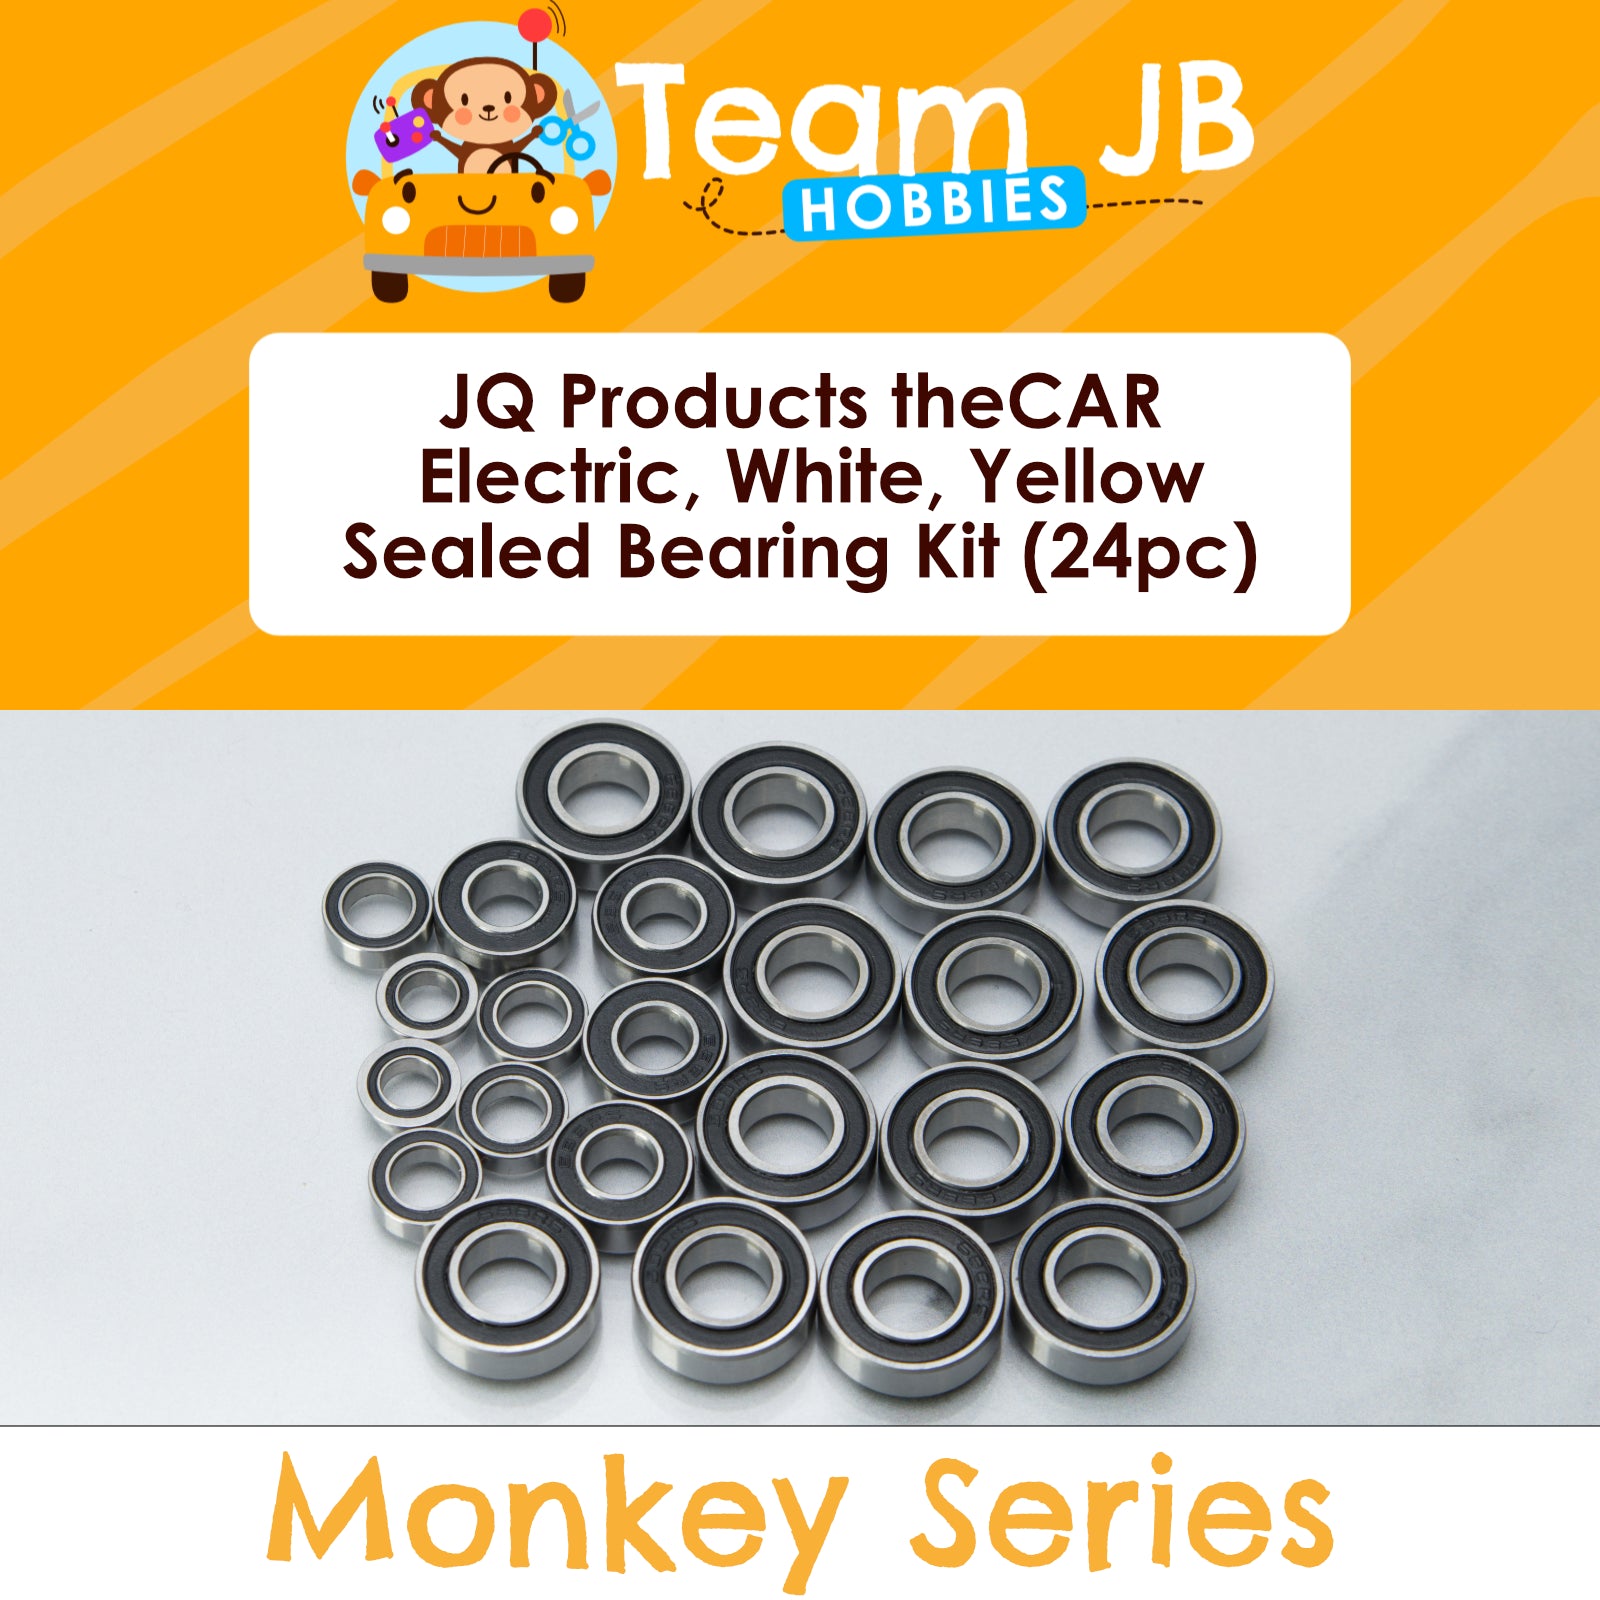 JQ Products theCAR Electric, White, Yellow - Sealed Bearing Kit